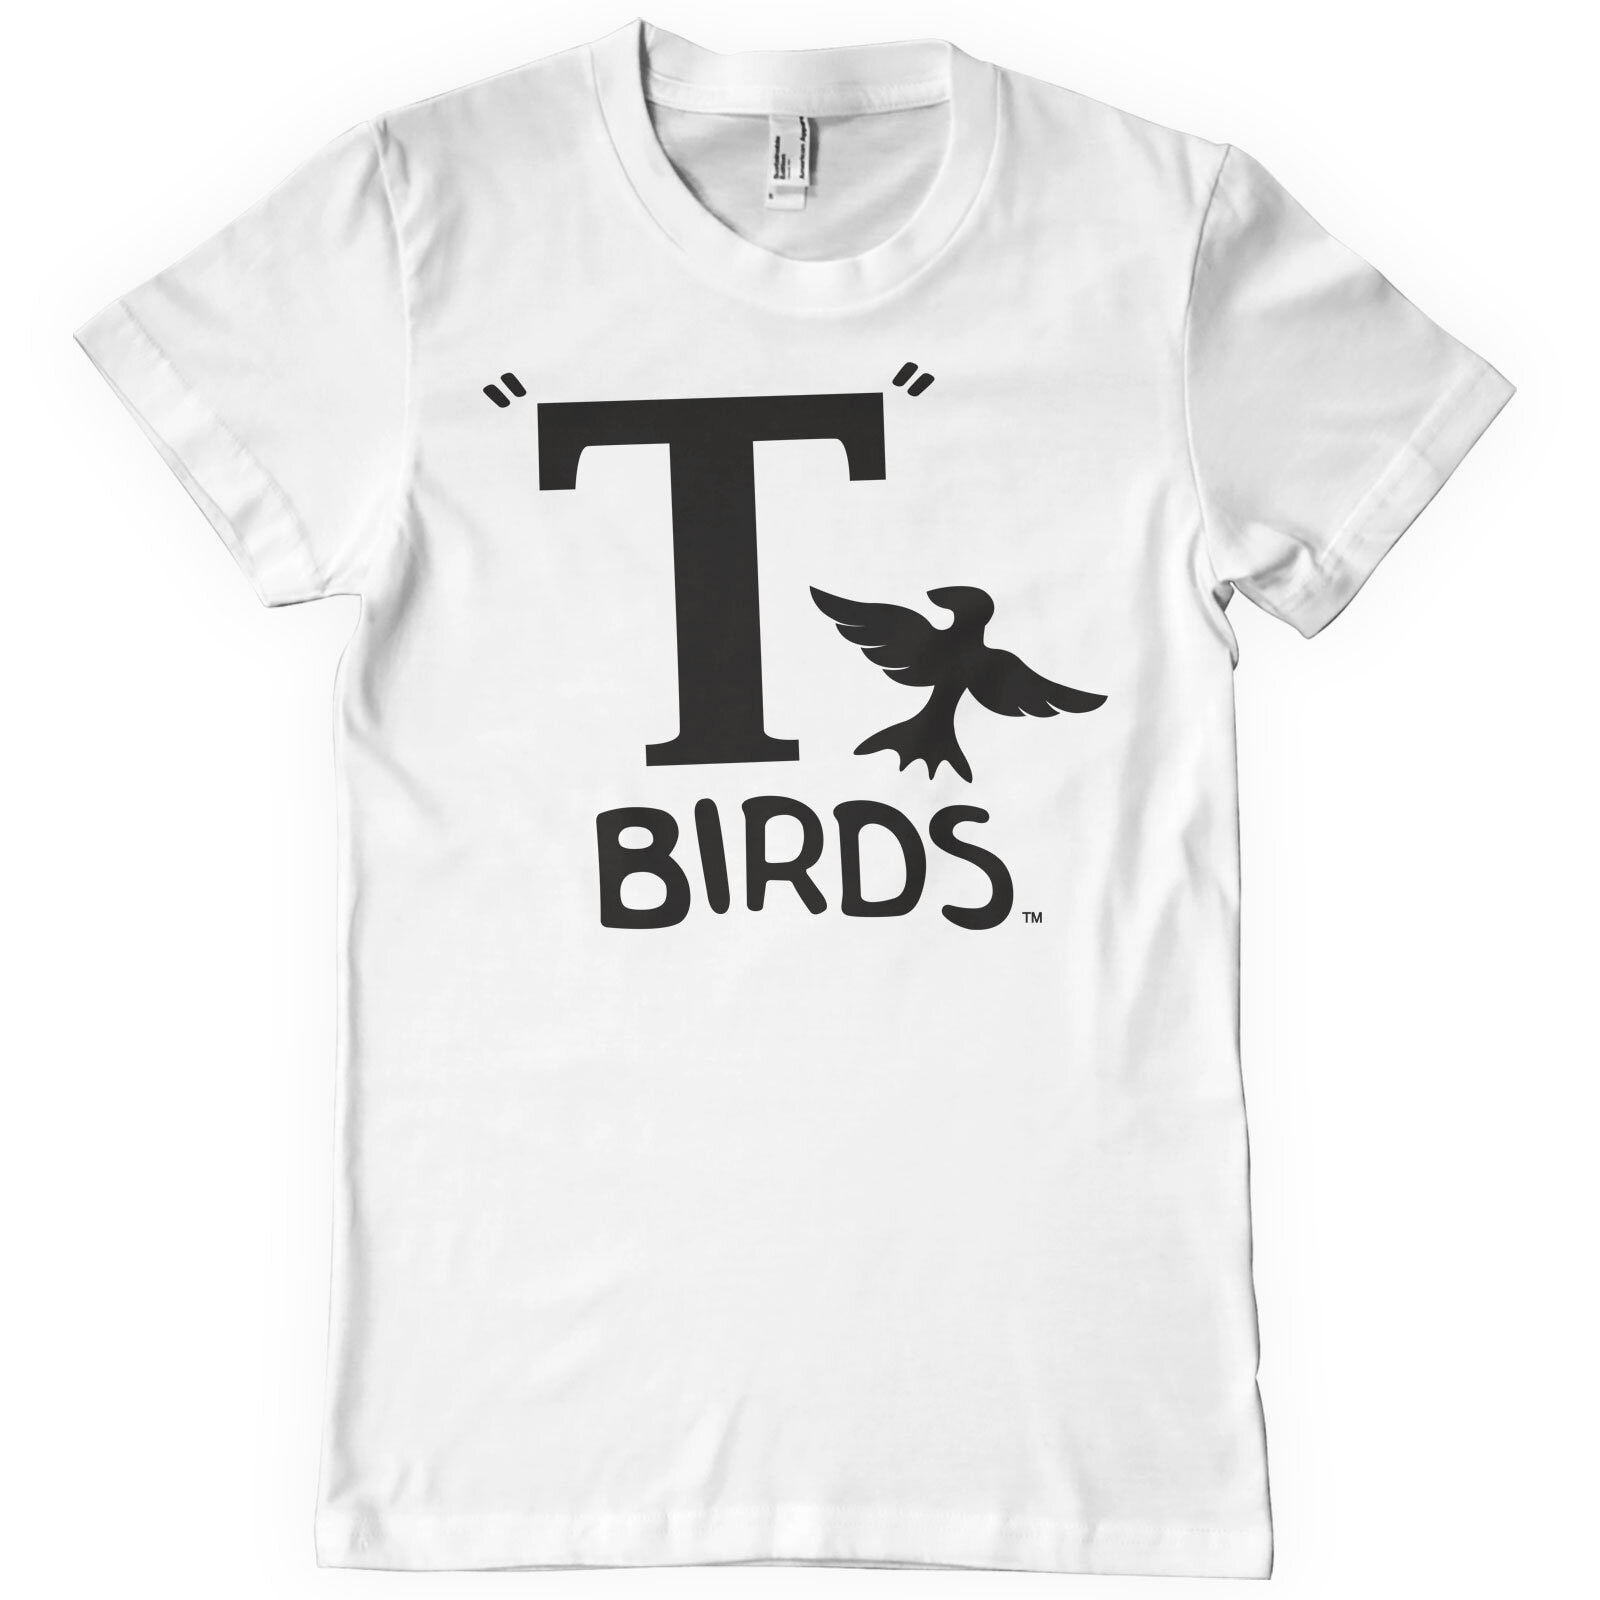 Grease - T Birds T-Shirt